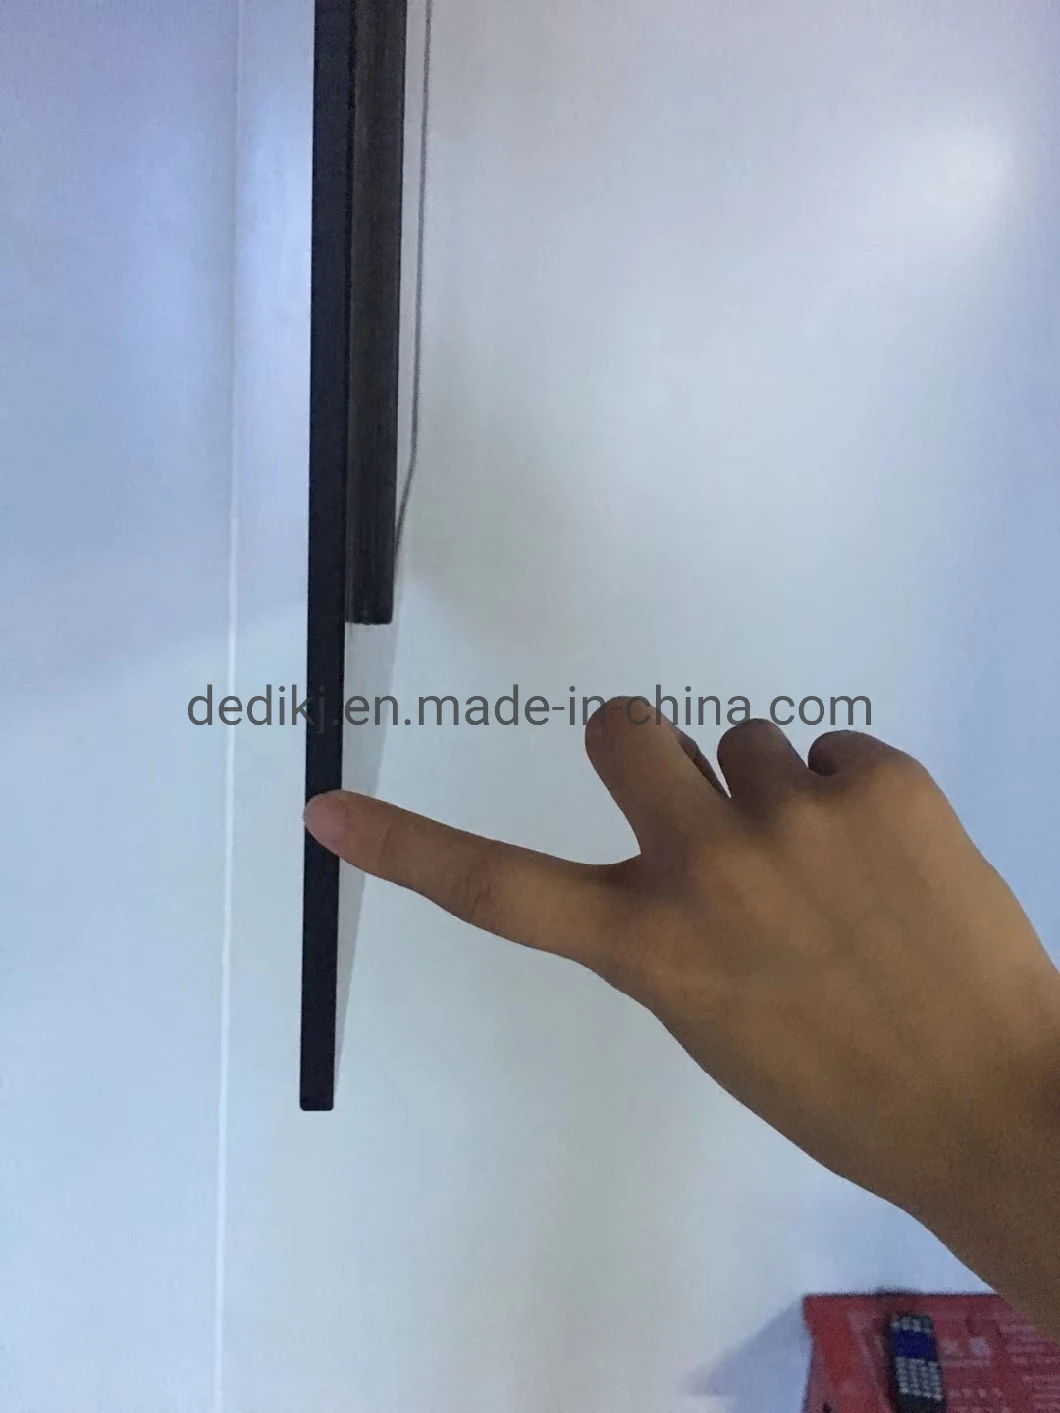 49 Inch Double Sided Super Slim OLED Digital Signage with Android or Windows OS